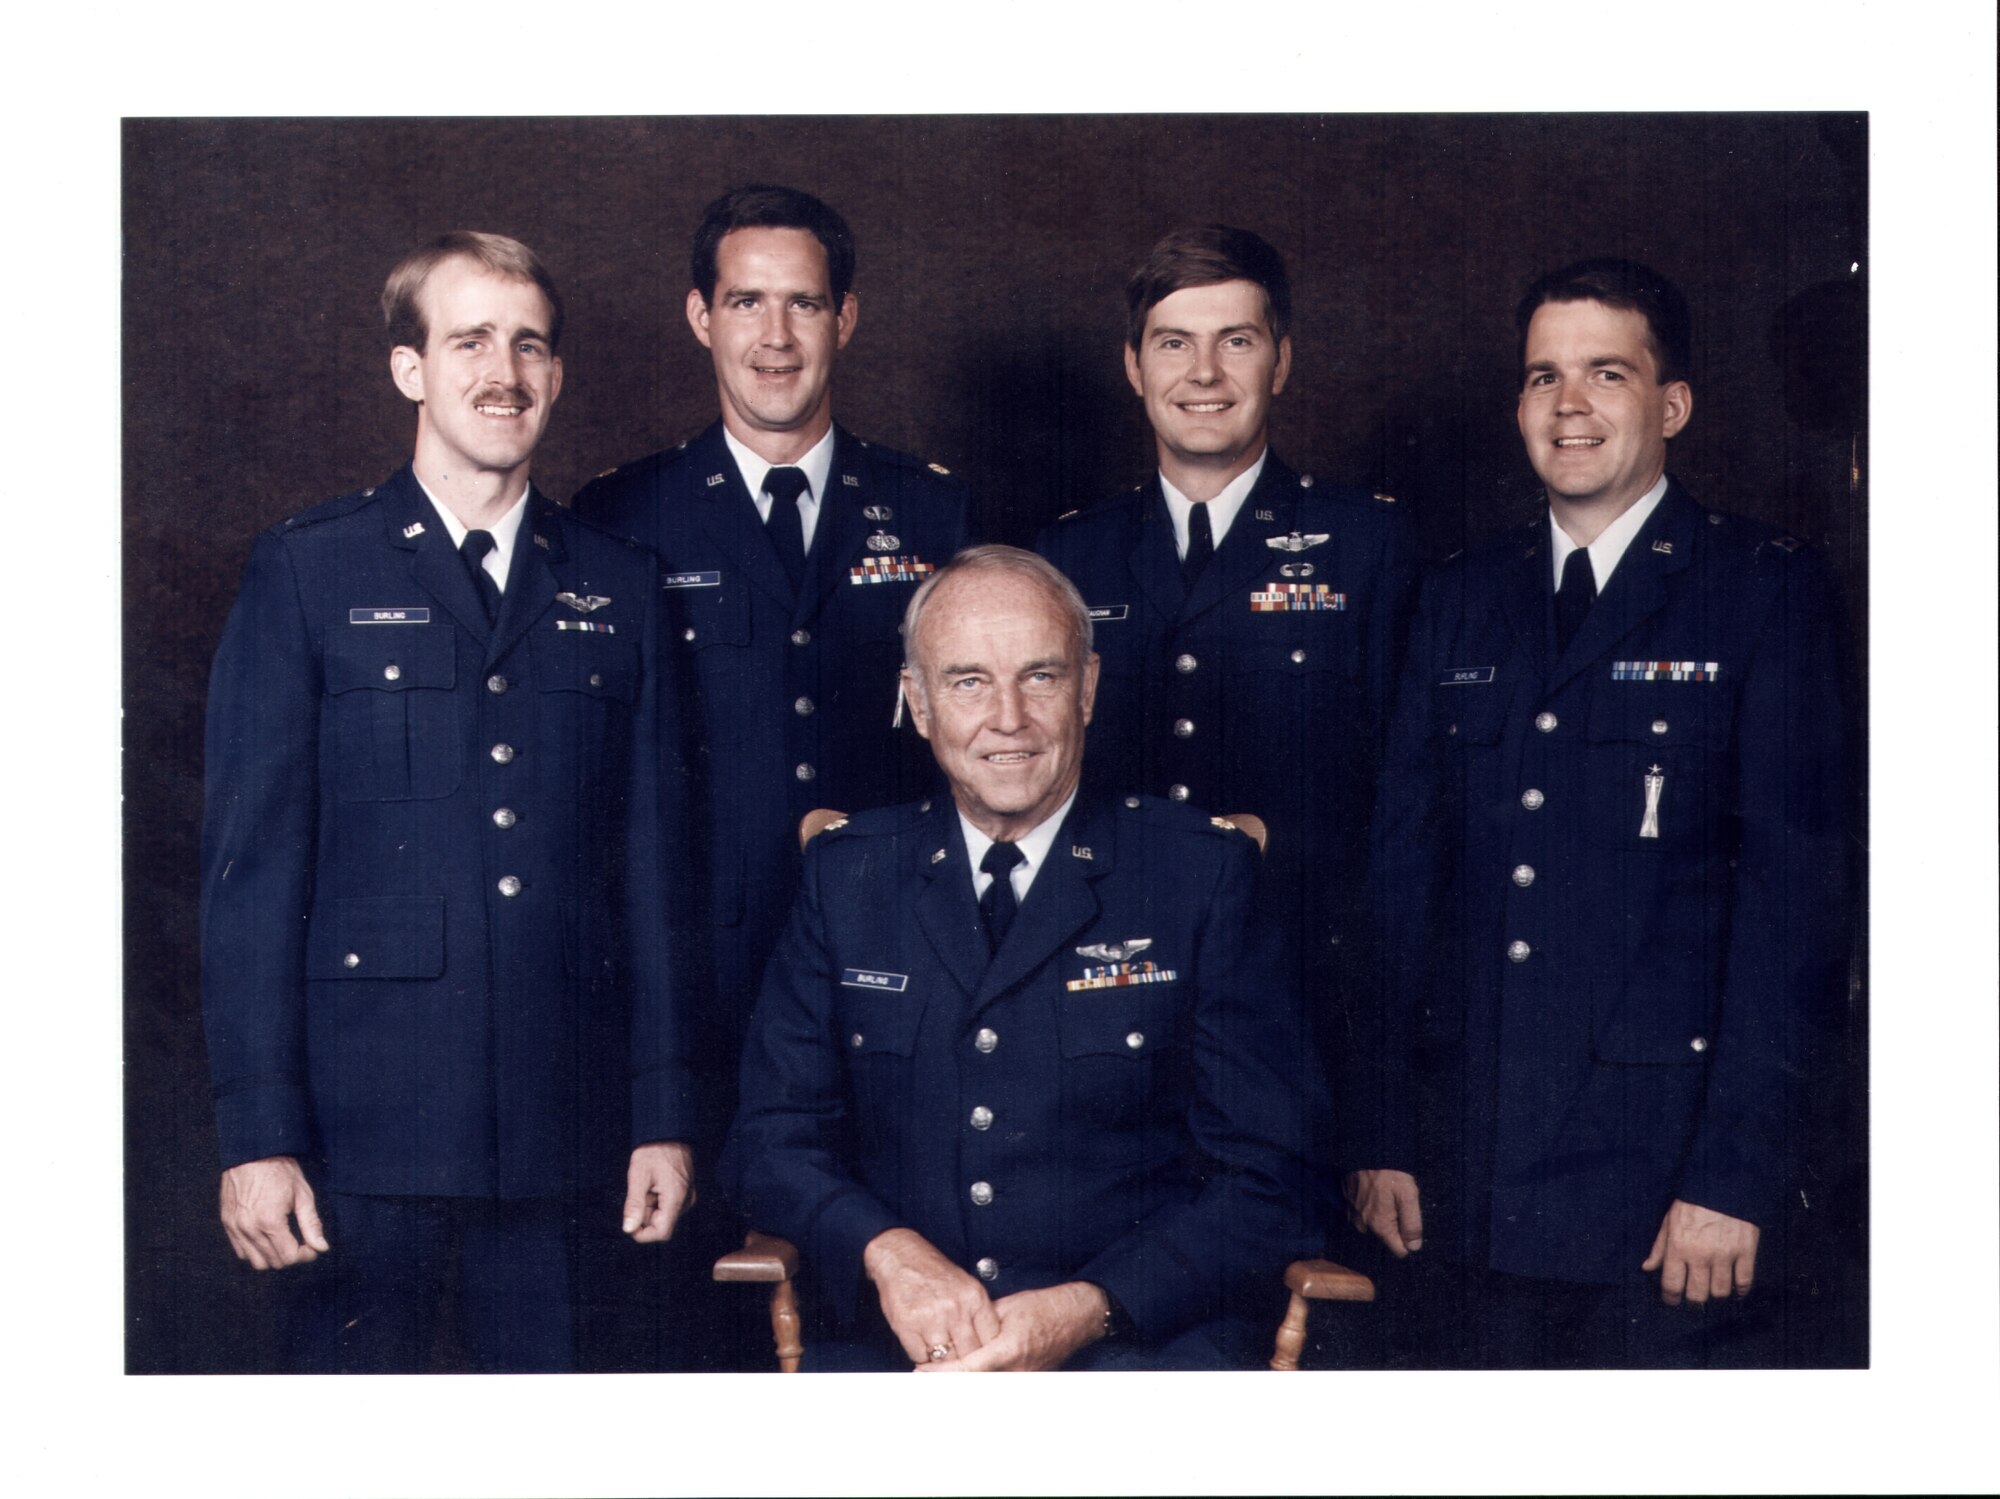 Air Force life was the standard in the Burling family, who combined served 126 years. Retired Col. Jim Burling Sr. (seated), started the trend and was later followed by (standing left to right) Steve Burling, his youngest son, Jim Burling Jr., his oldest son, John Gaughan, his son-in-law, and John Burling, his middle son. Steve, a former MC-130H navigator for the 15th Special Operations Squadron at Hurlburt Field, retired Oct. 1. (Courtesy photo)